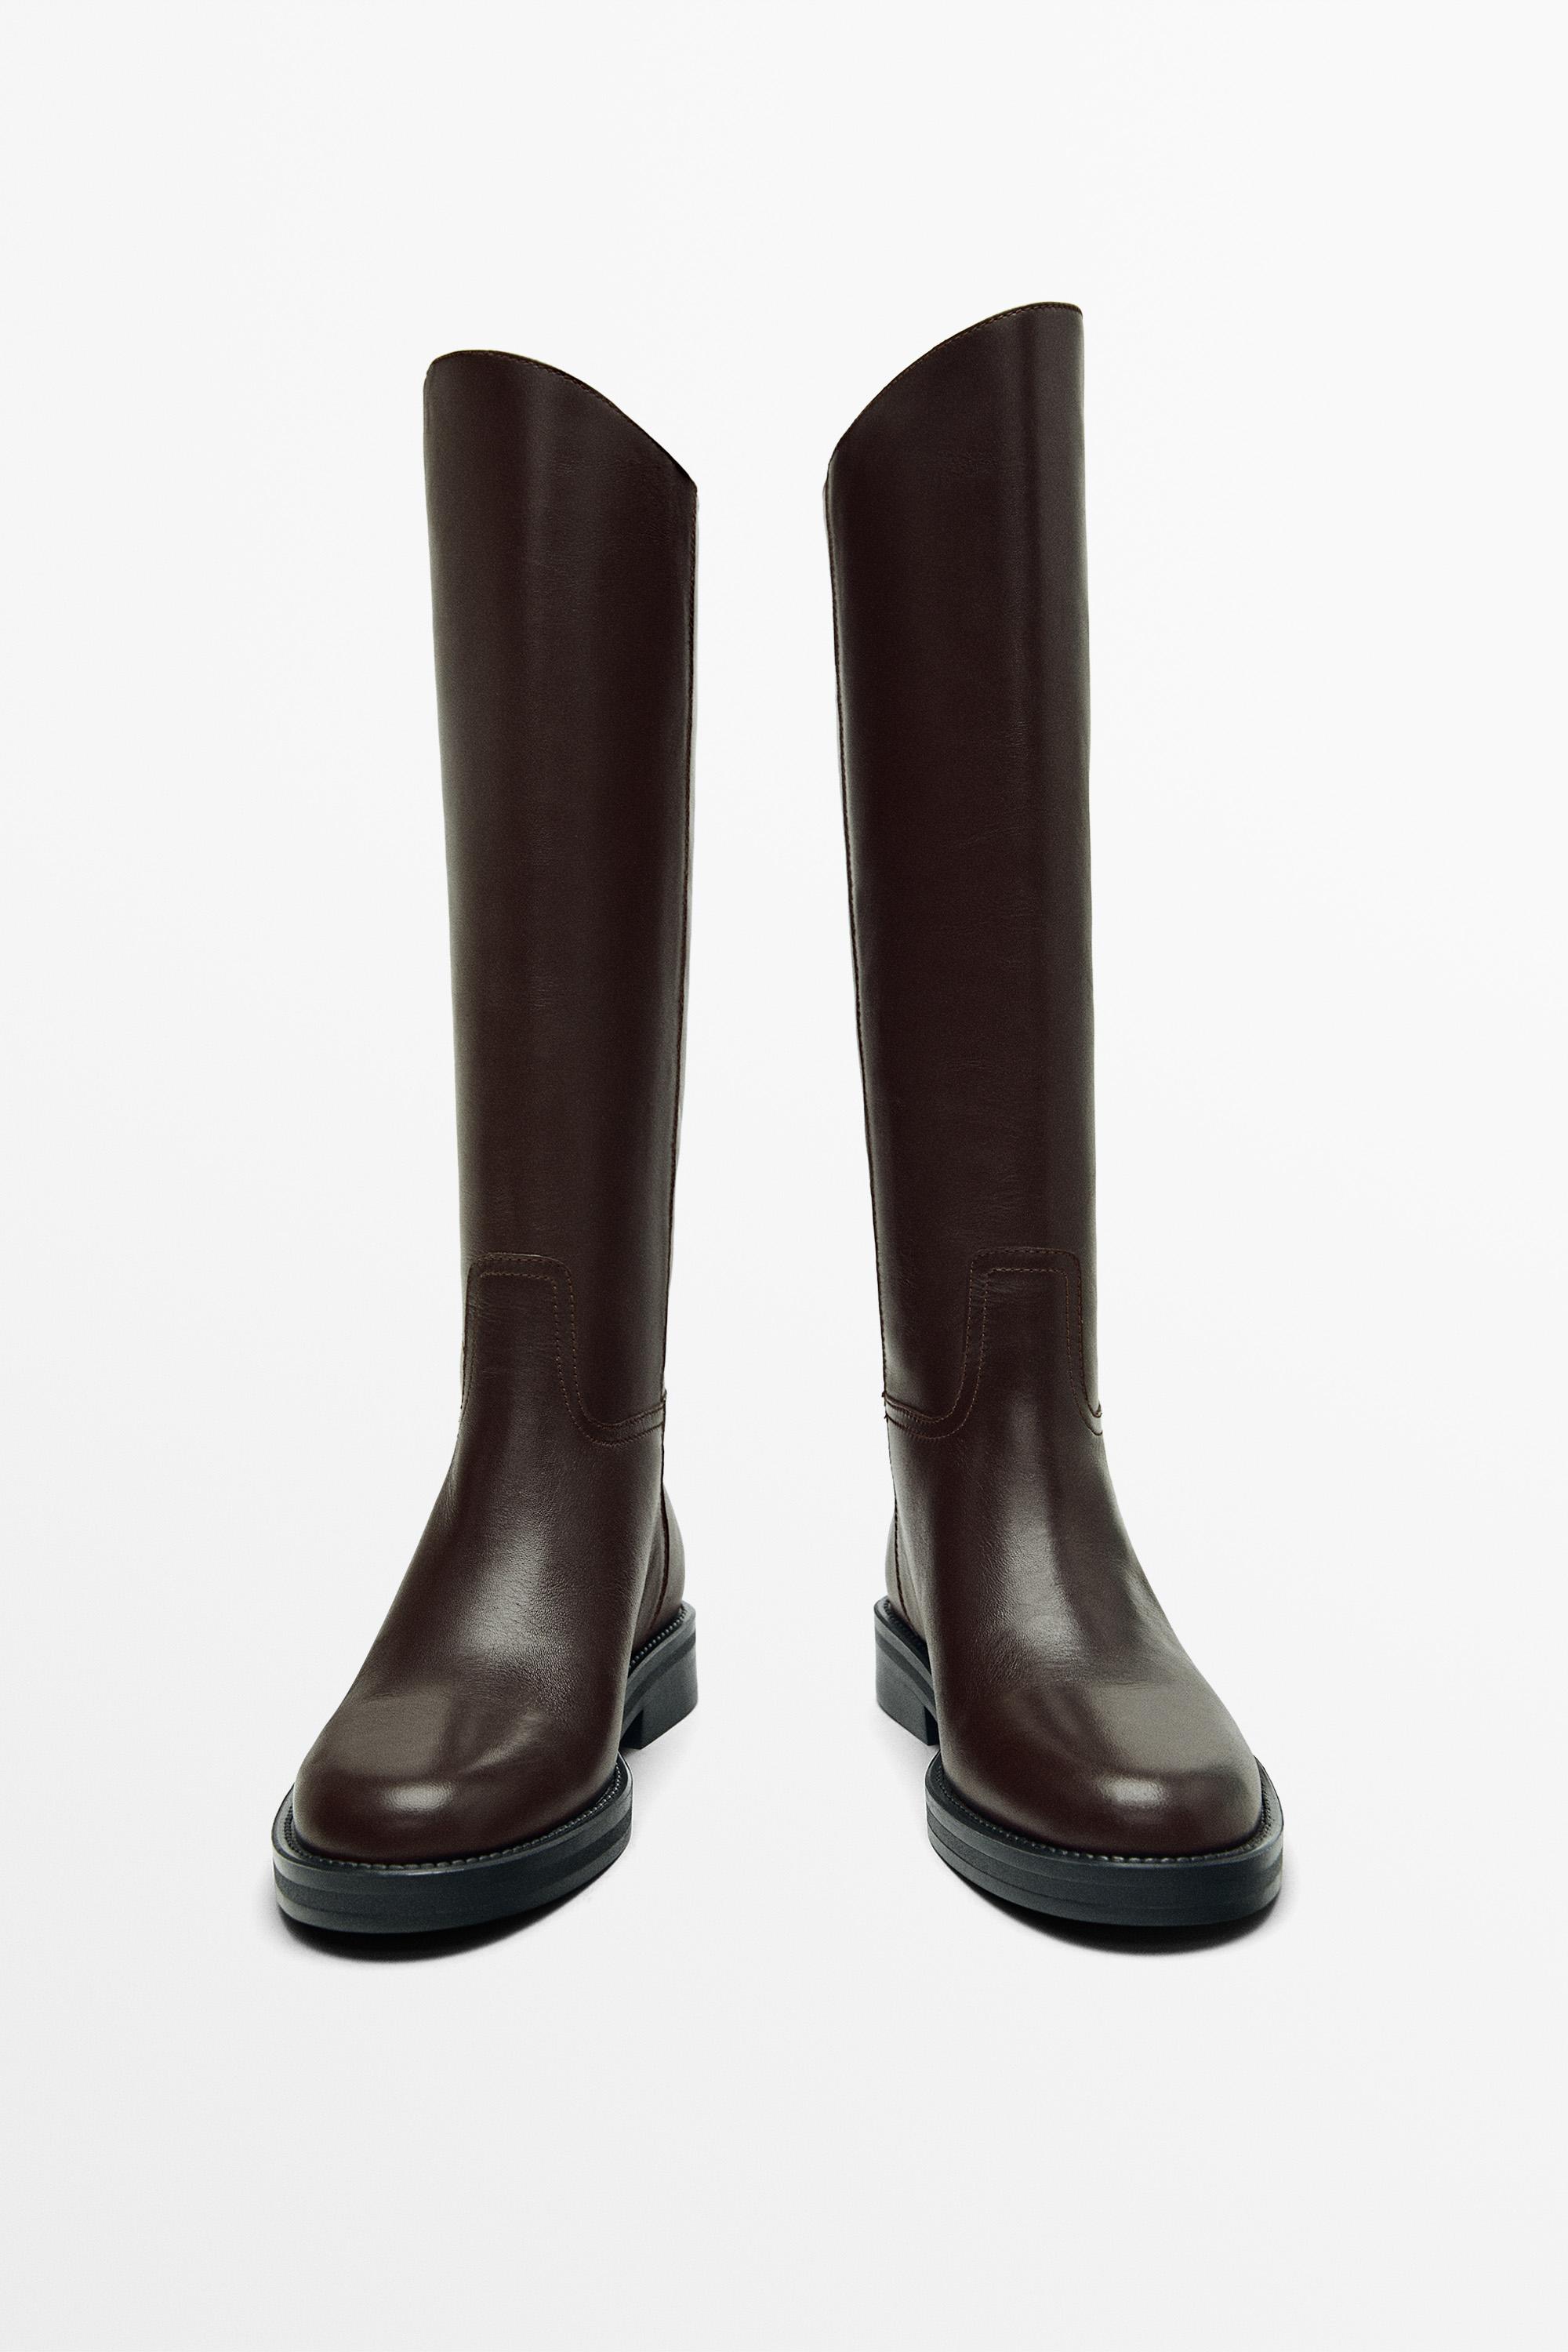 Women's Boots & Ankle boots | ZARA United States